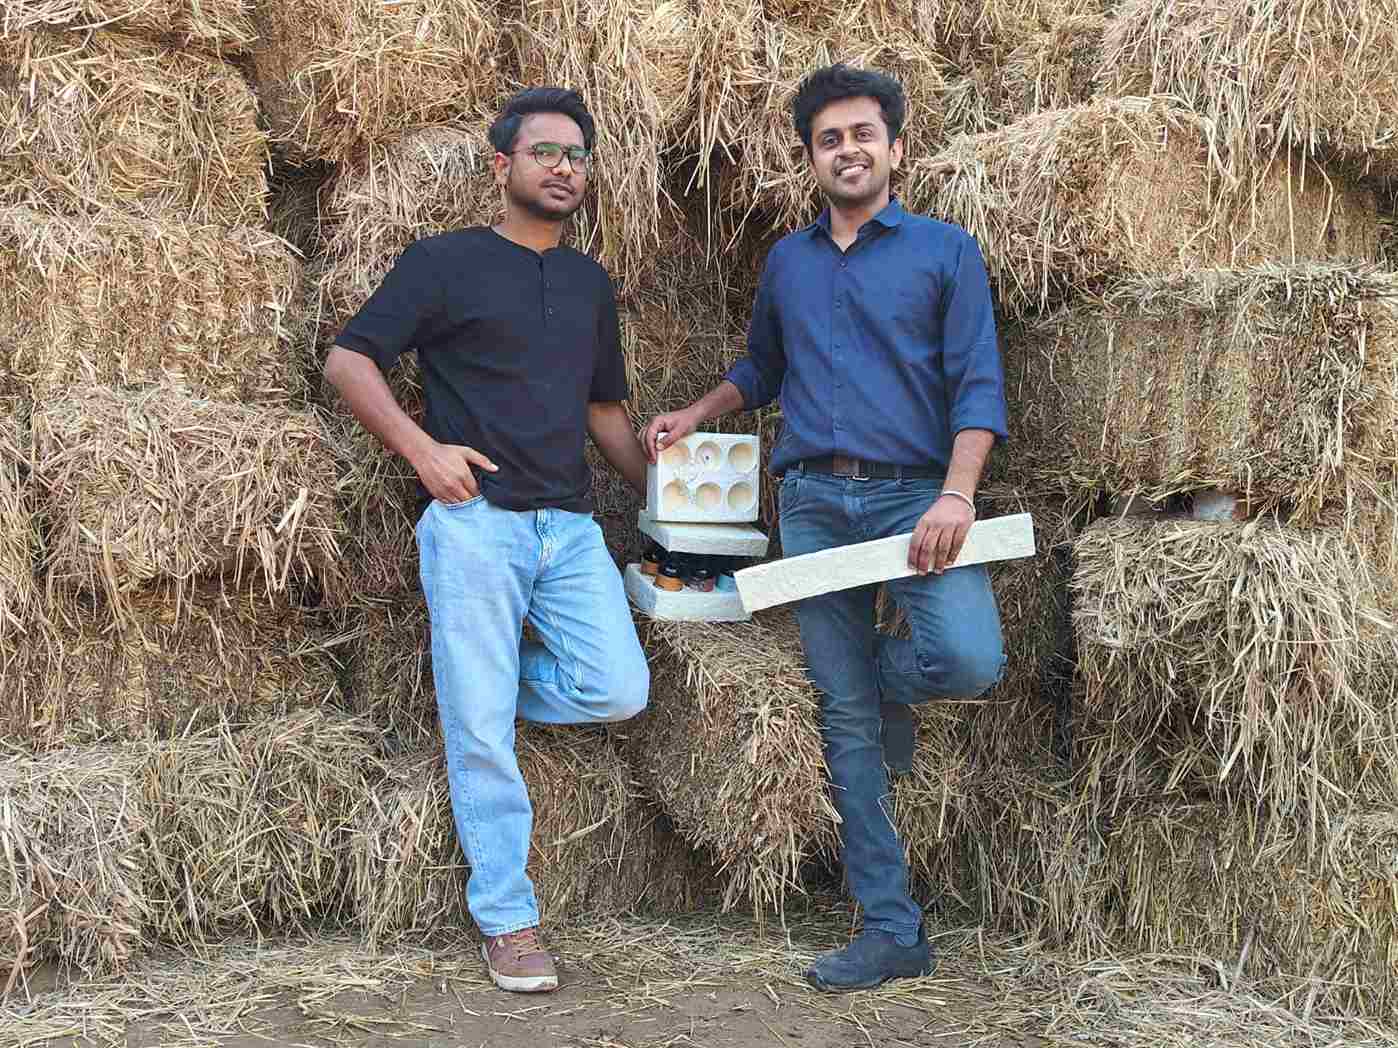 Arpit Dhupar and Anand Bodh, founders of Dharaksha Ecosolutions